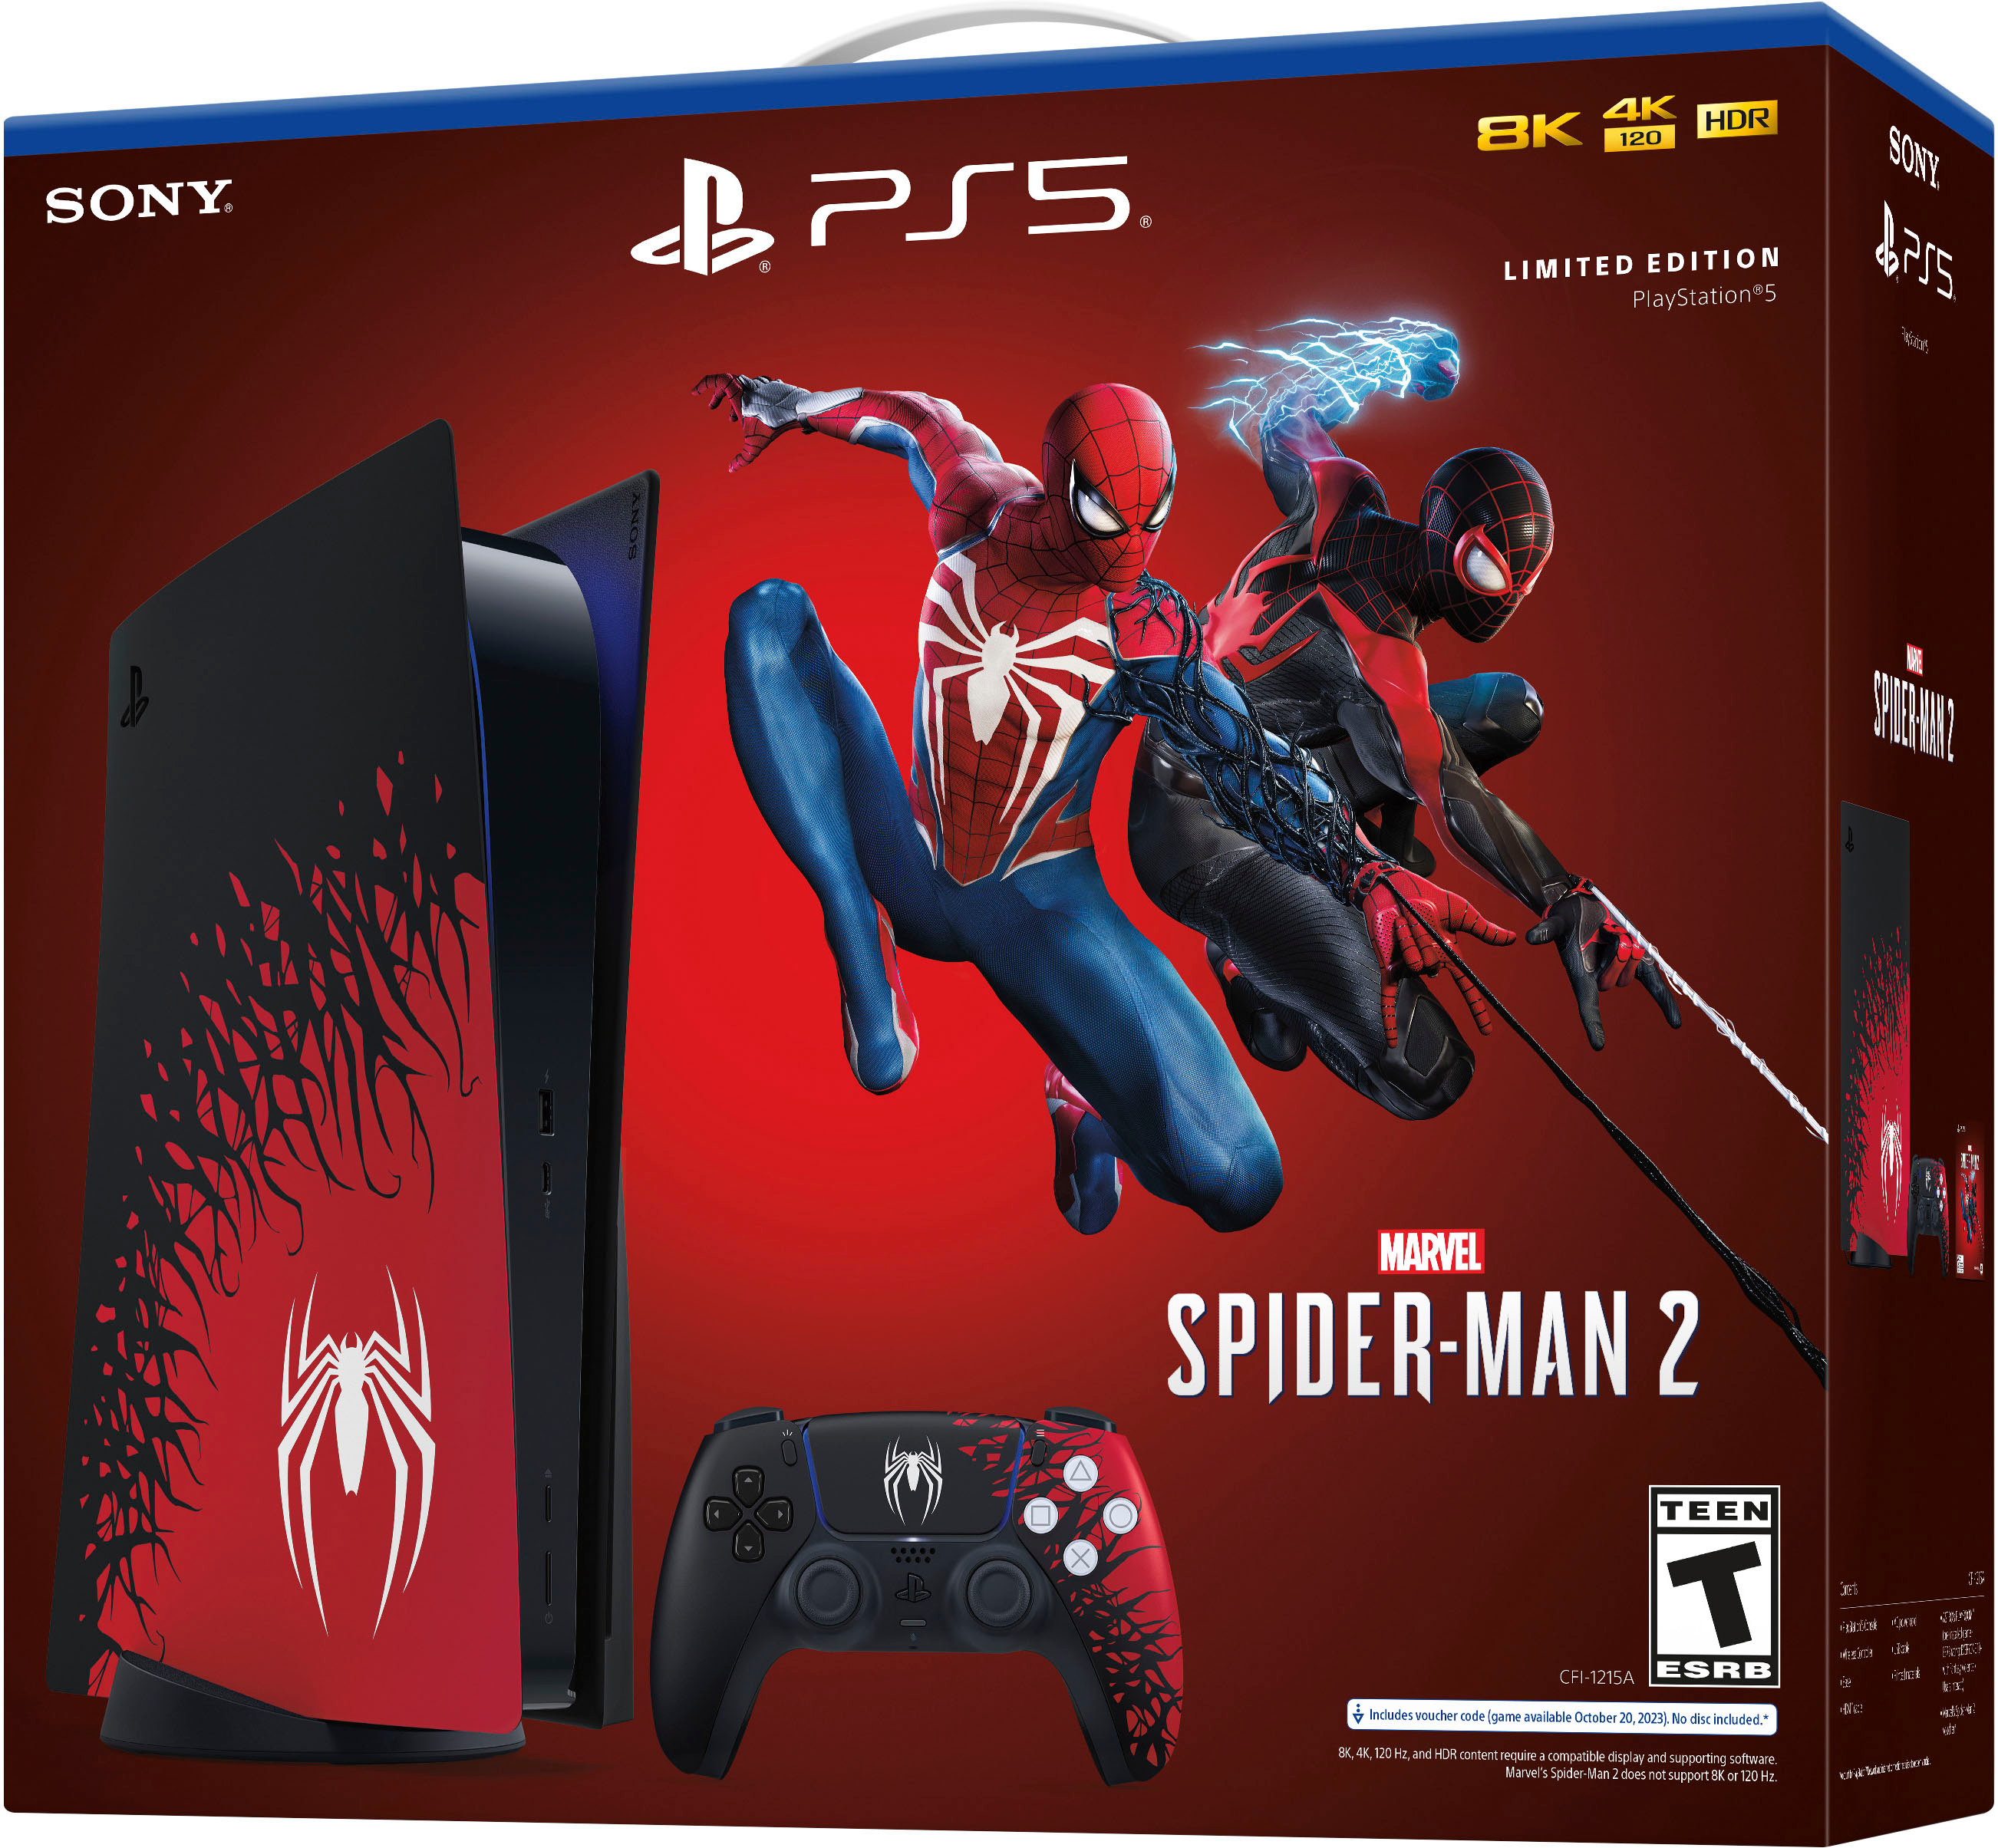 PlayStation 5 Disc Console Covers – Marvel's Spider-Man 2 Limited Edition 